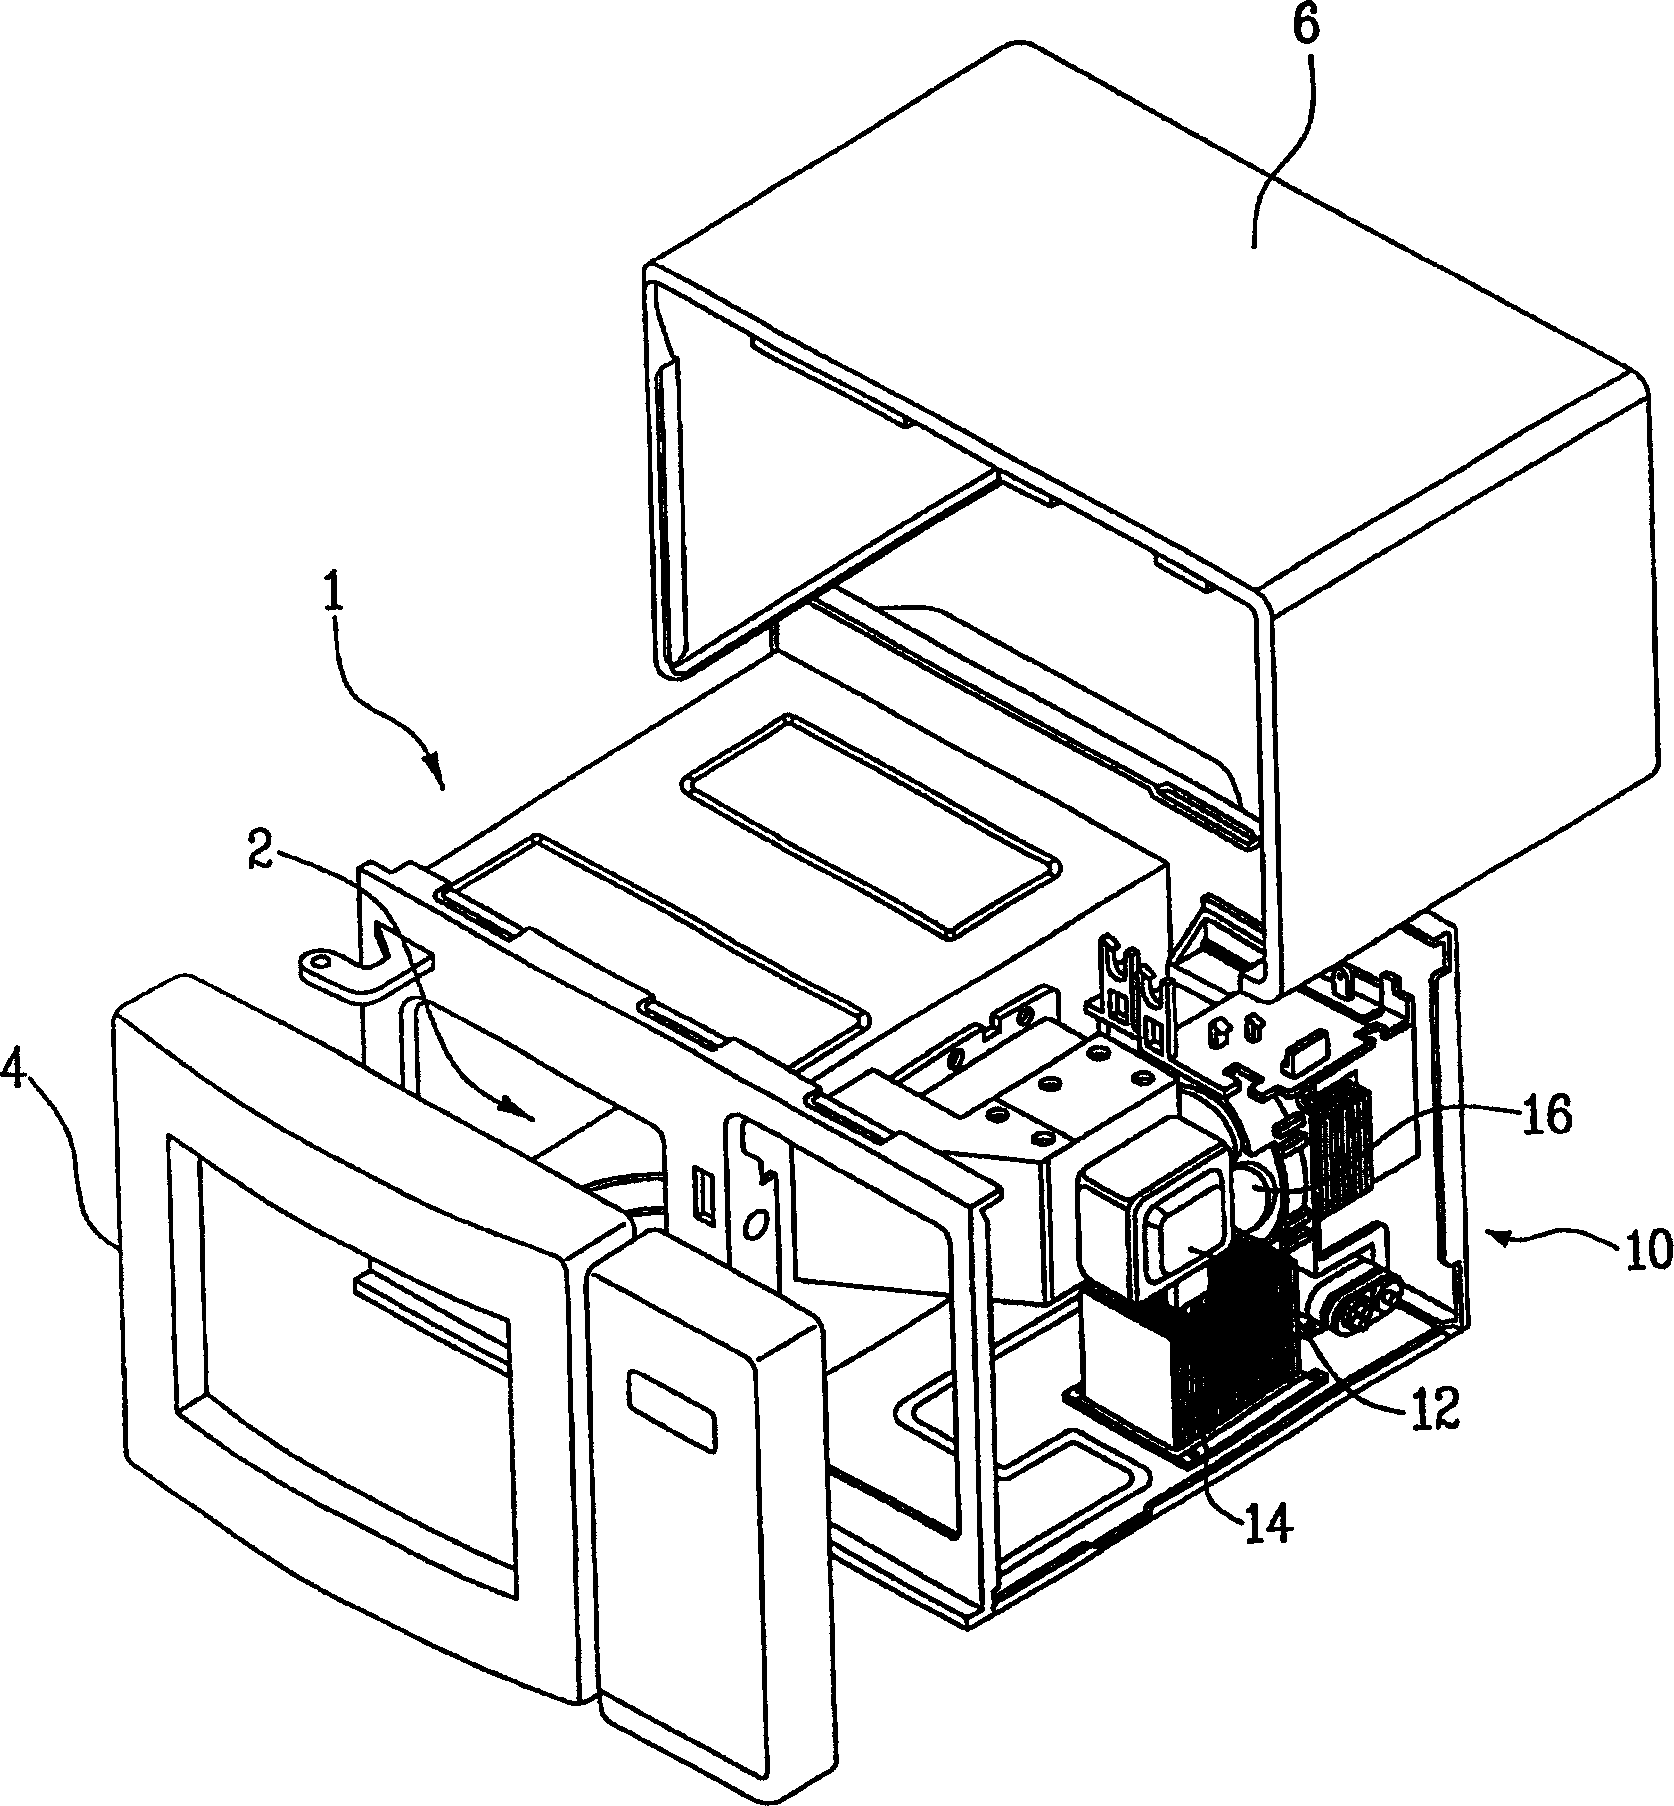 Microwave oven comprising toaster